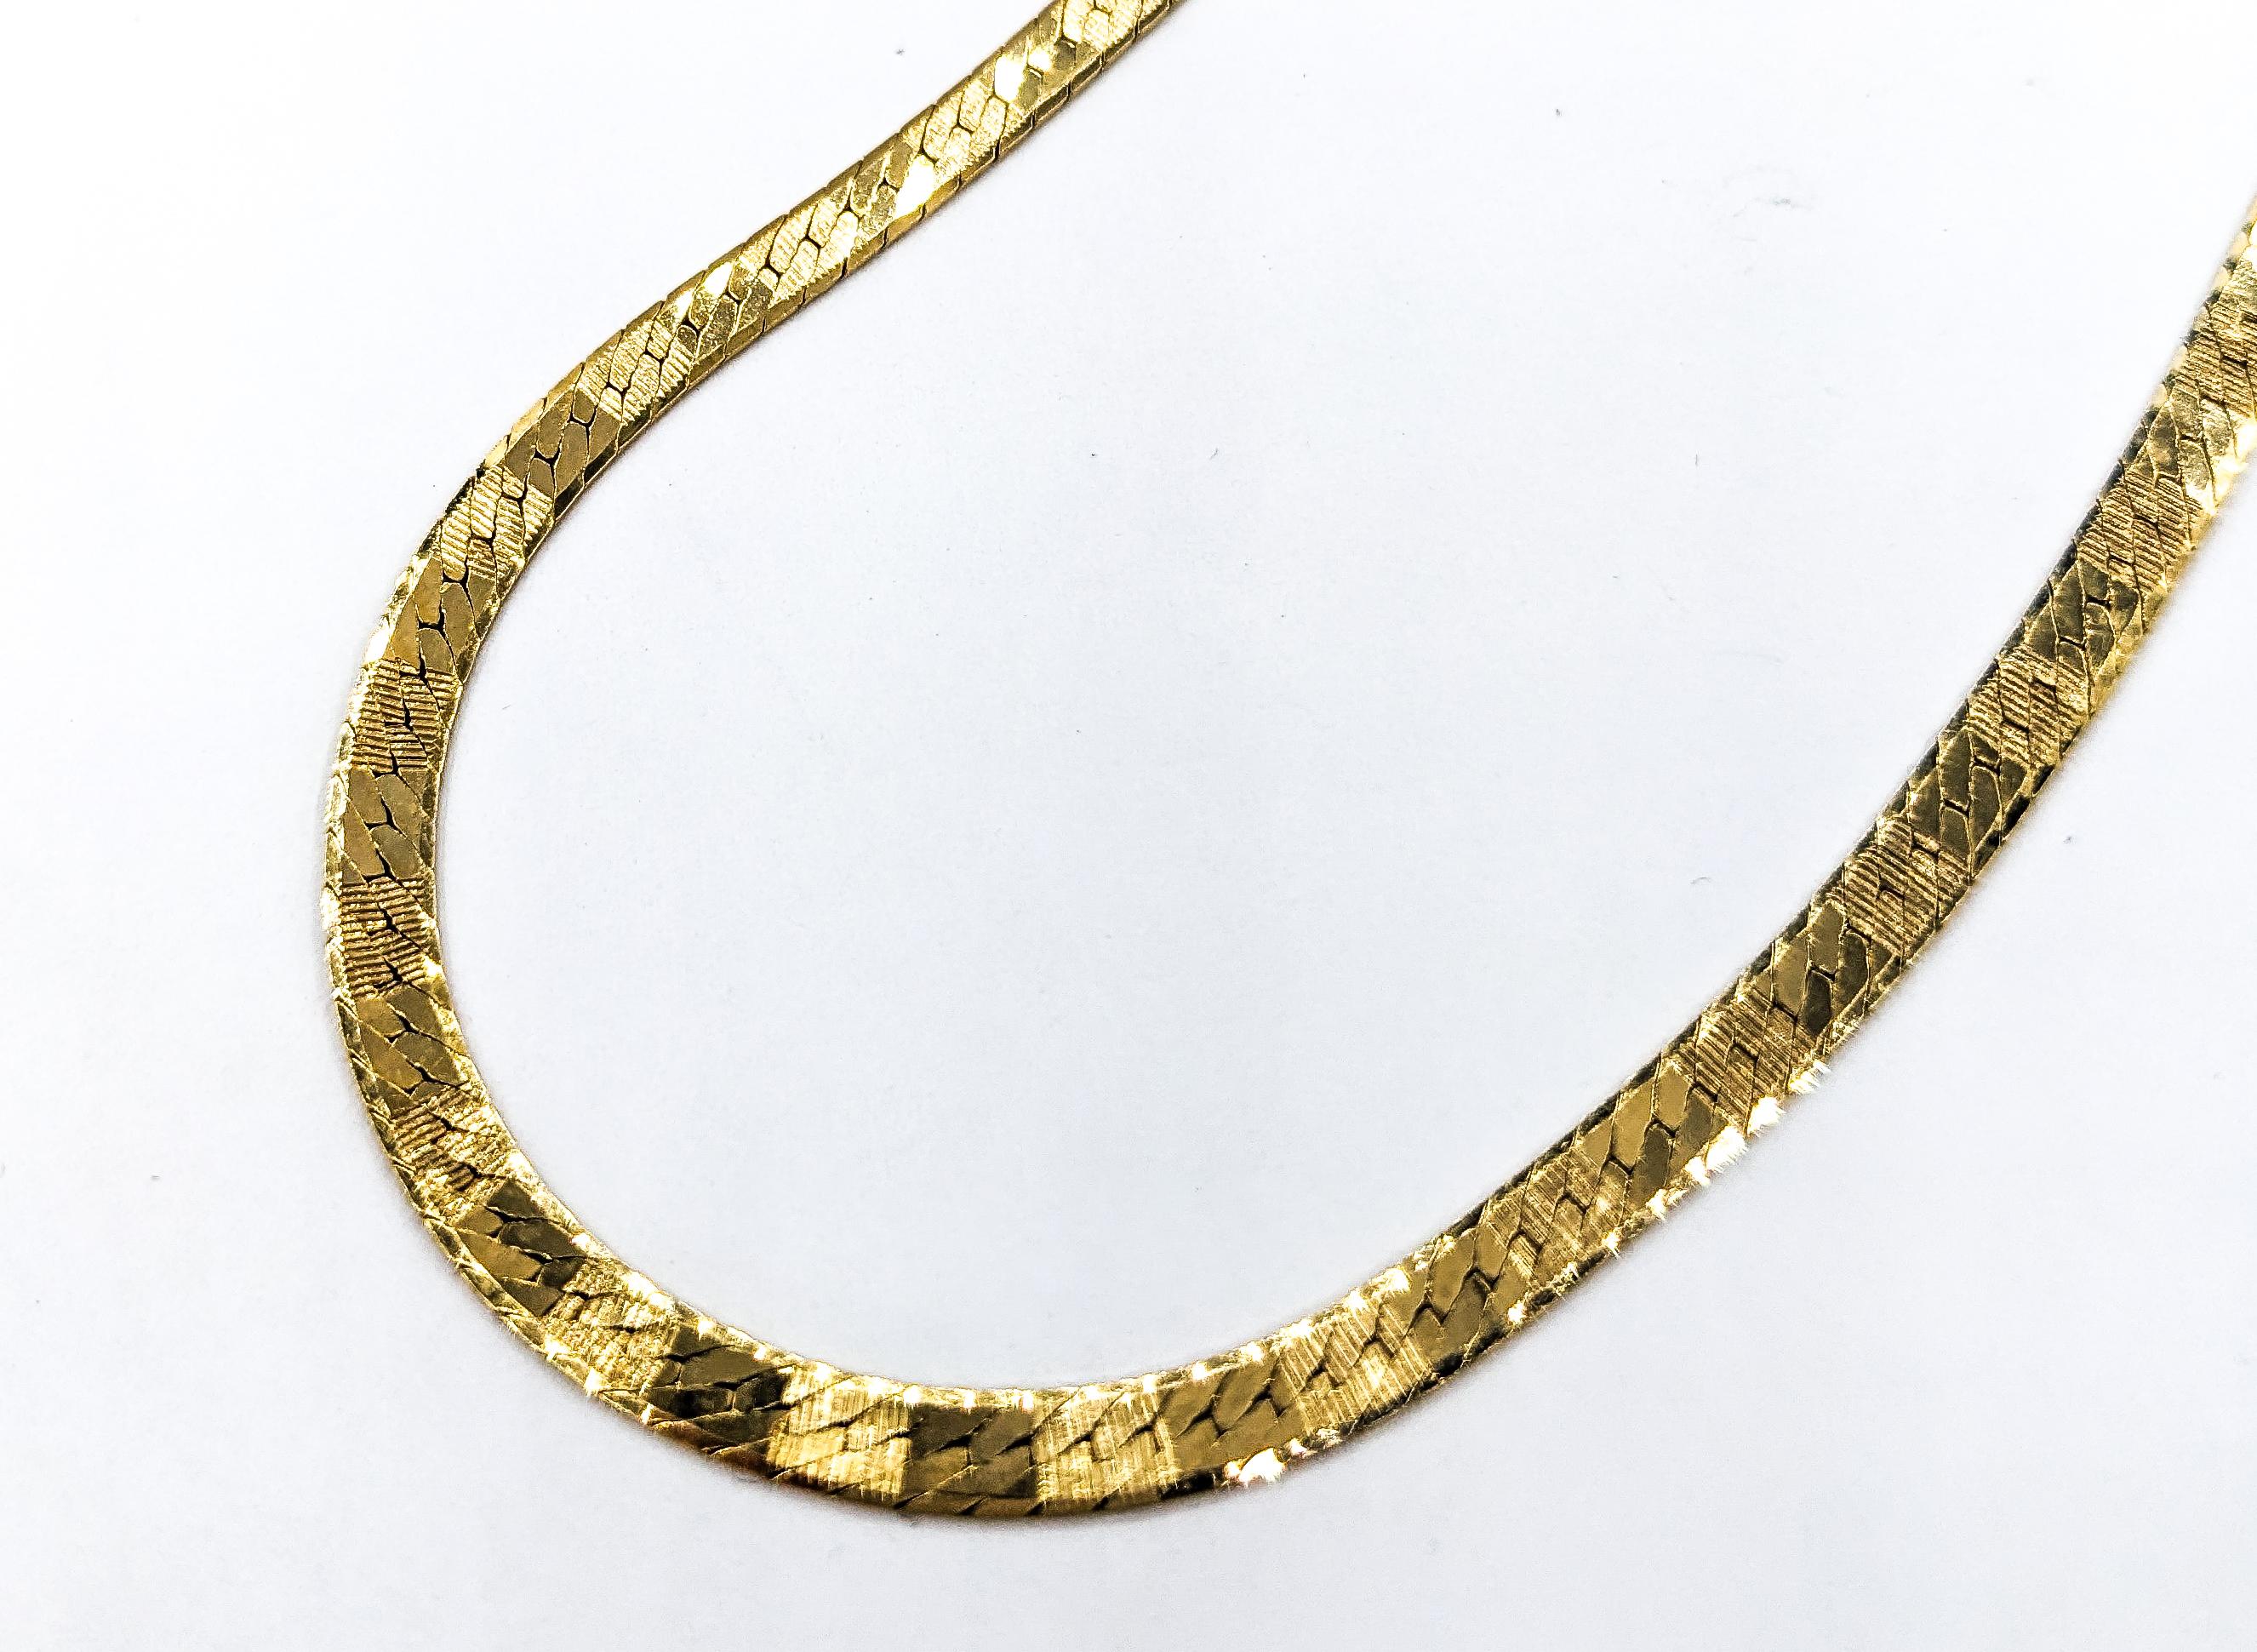 Herringbone Design Necklace In Yellow Gold

This stunning gold fashion necklace, meticulously crafted in 14kt yellow gold, features a striking herringbone textured design that elegantly reflects light, showcasing a brilliant sheen that captures the